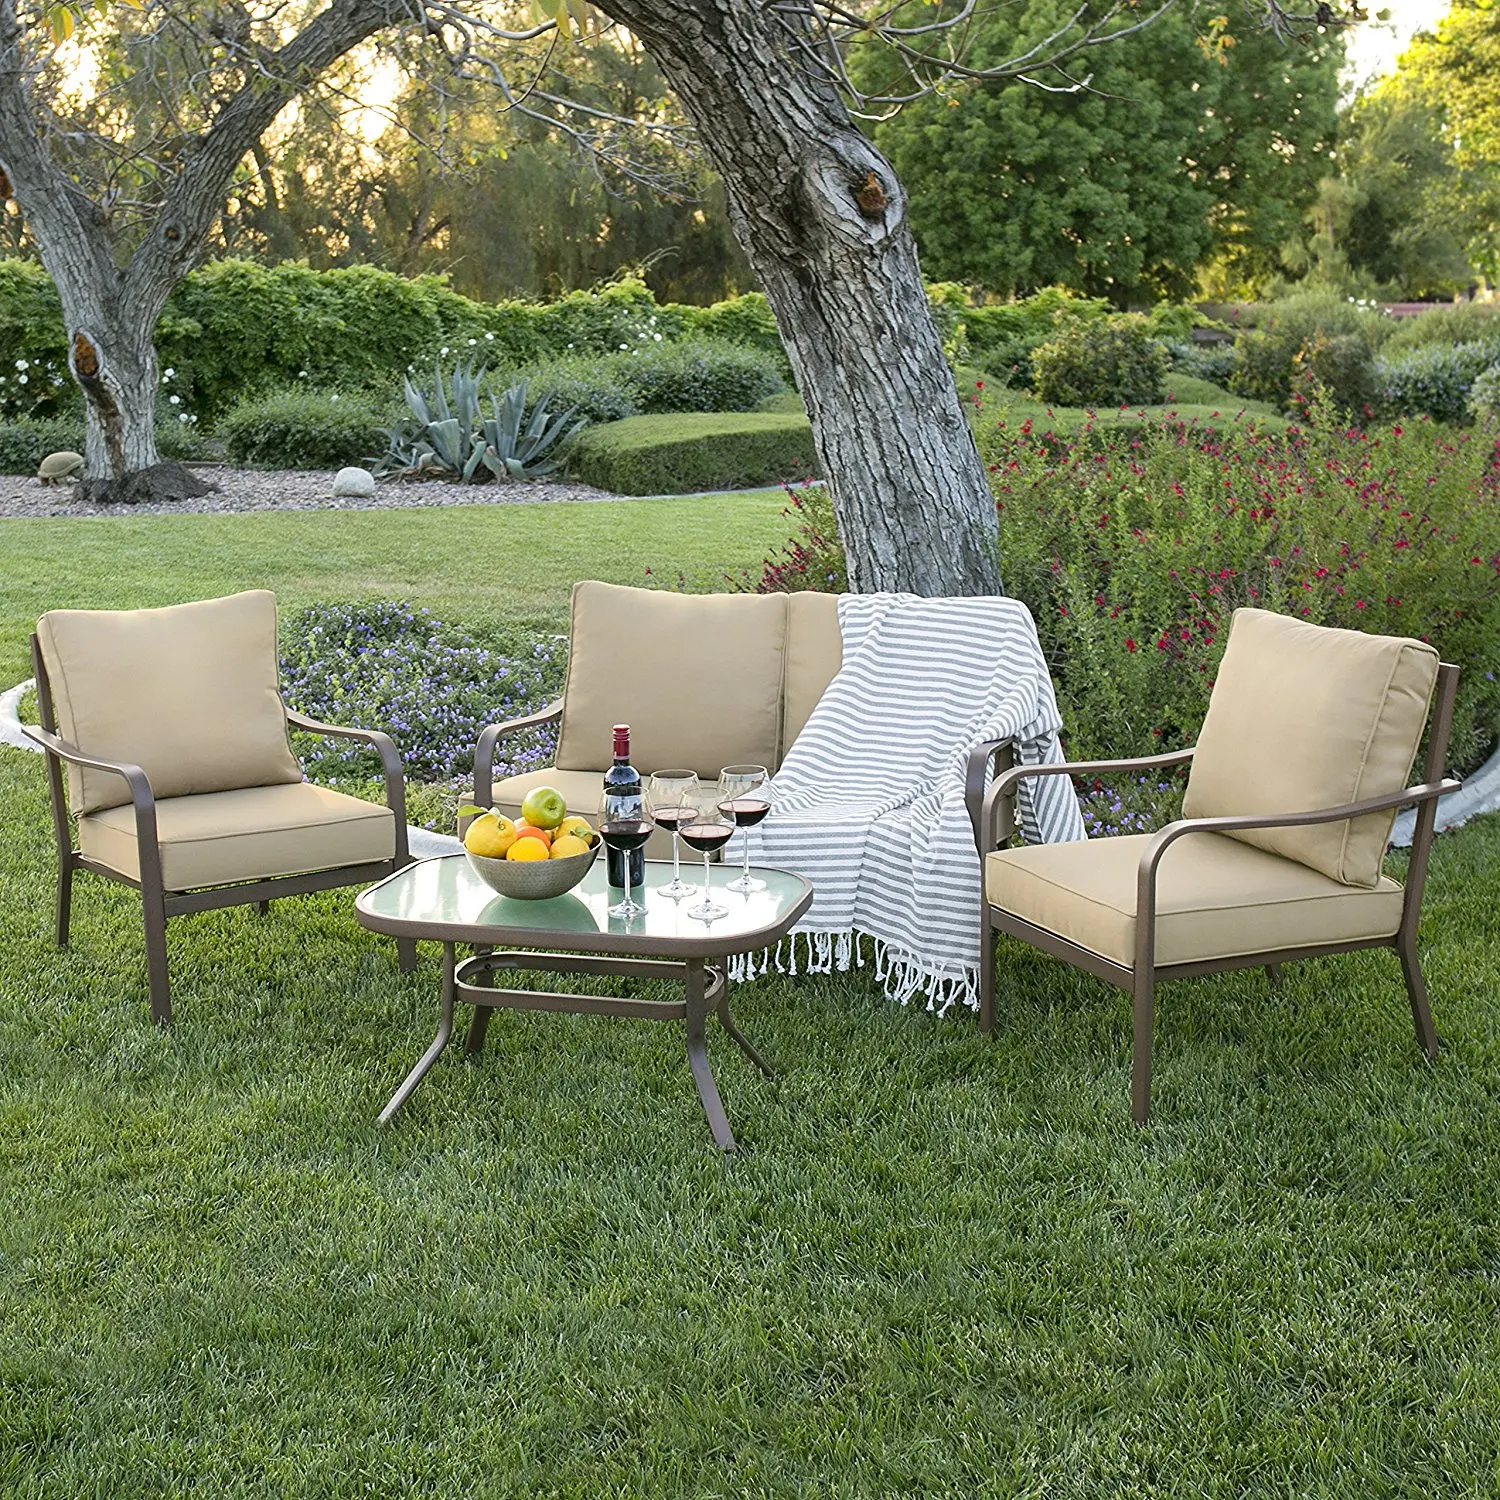 Cheap Patio Table Cushions, find Patio Table Cushions deals on line at